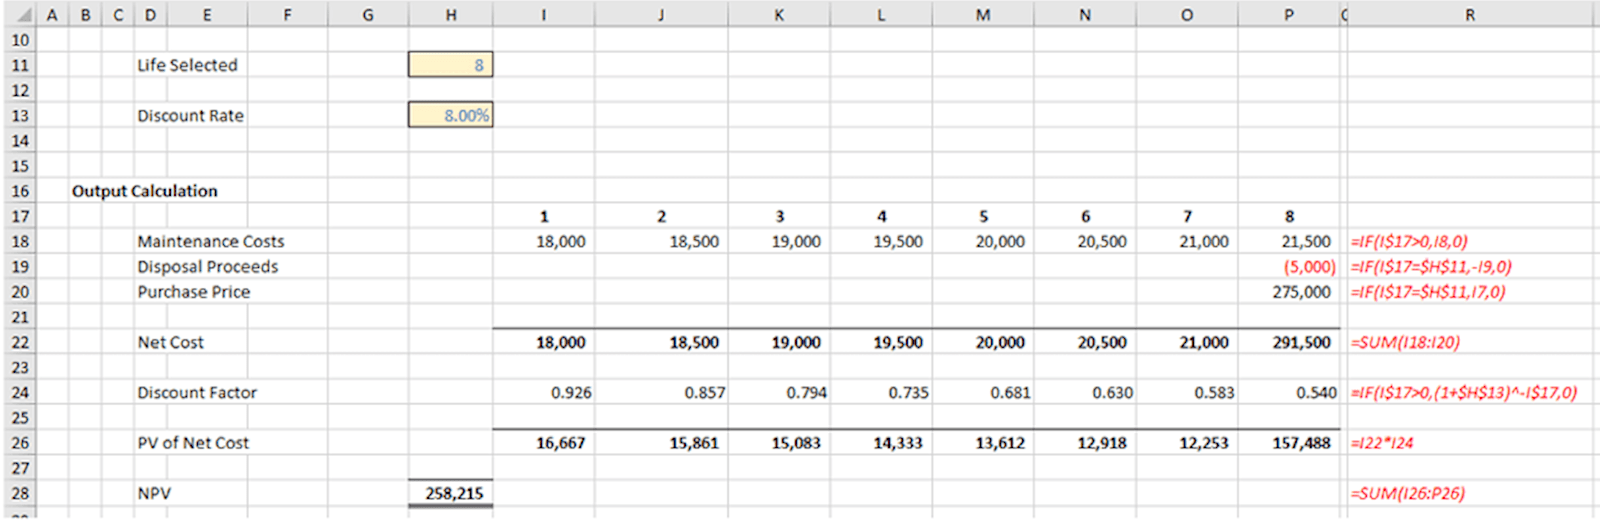 image of discounted cash flow financial appraisal 